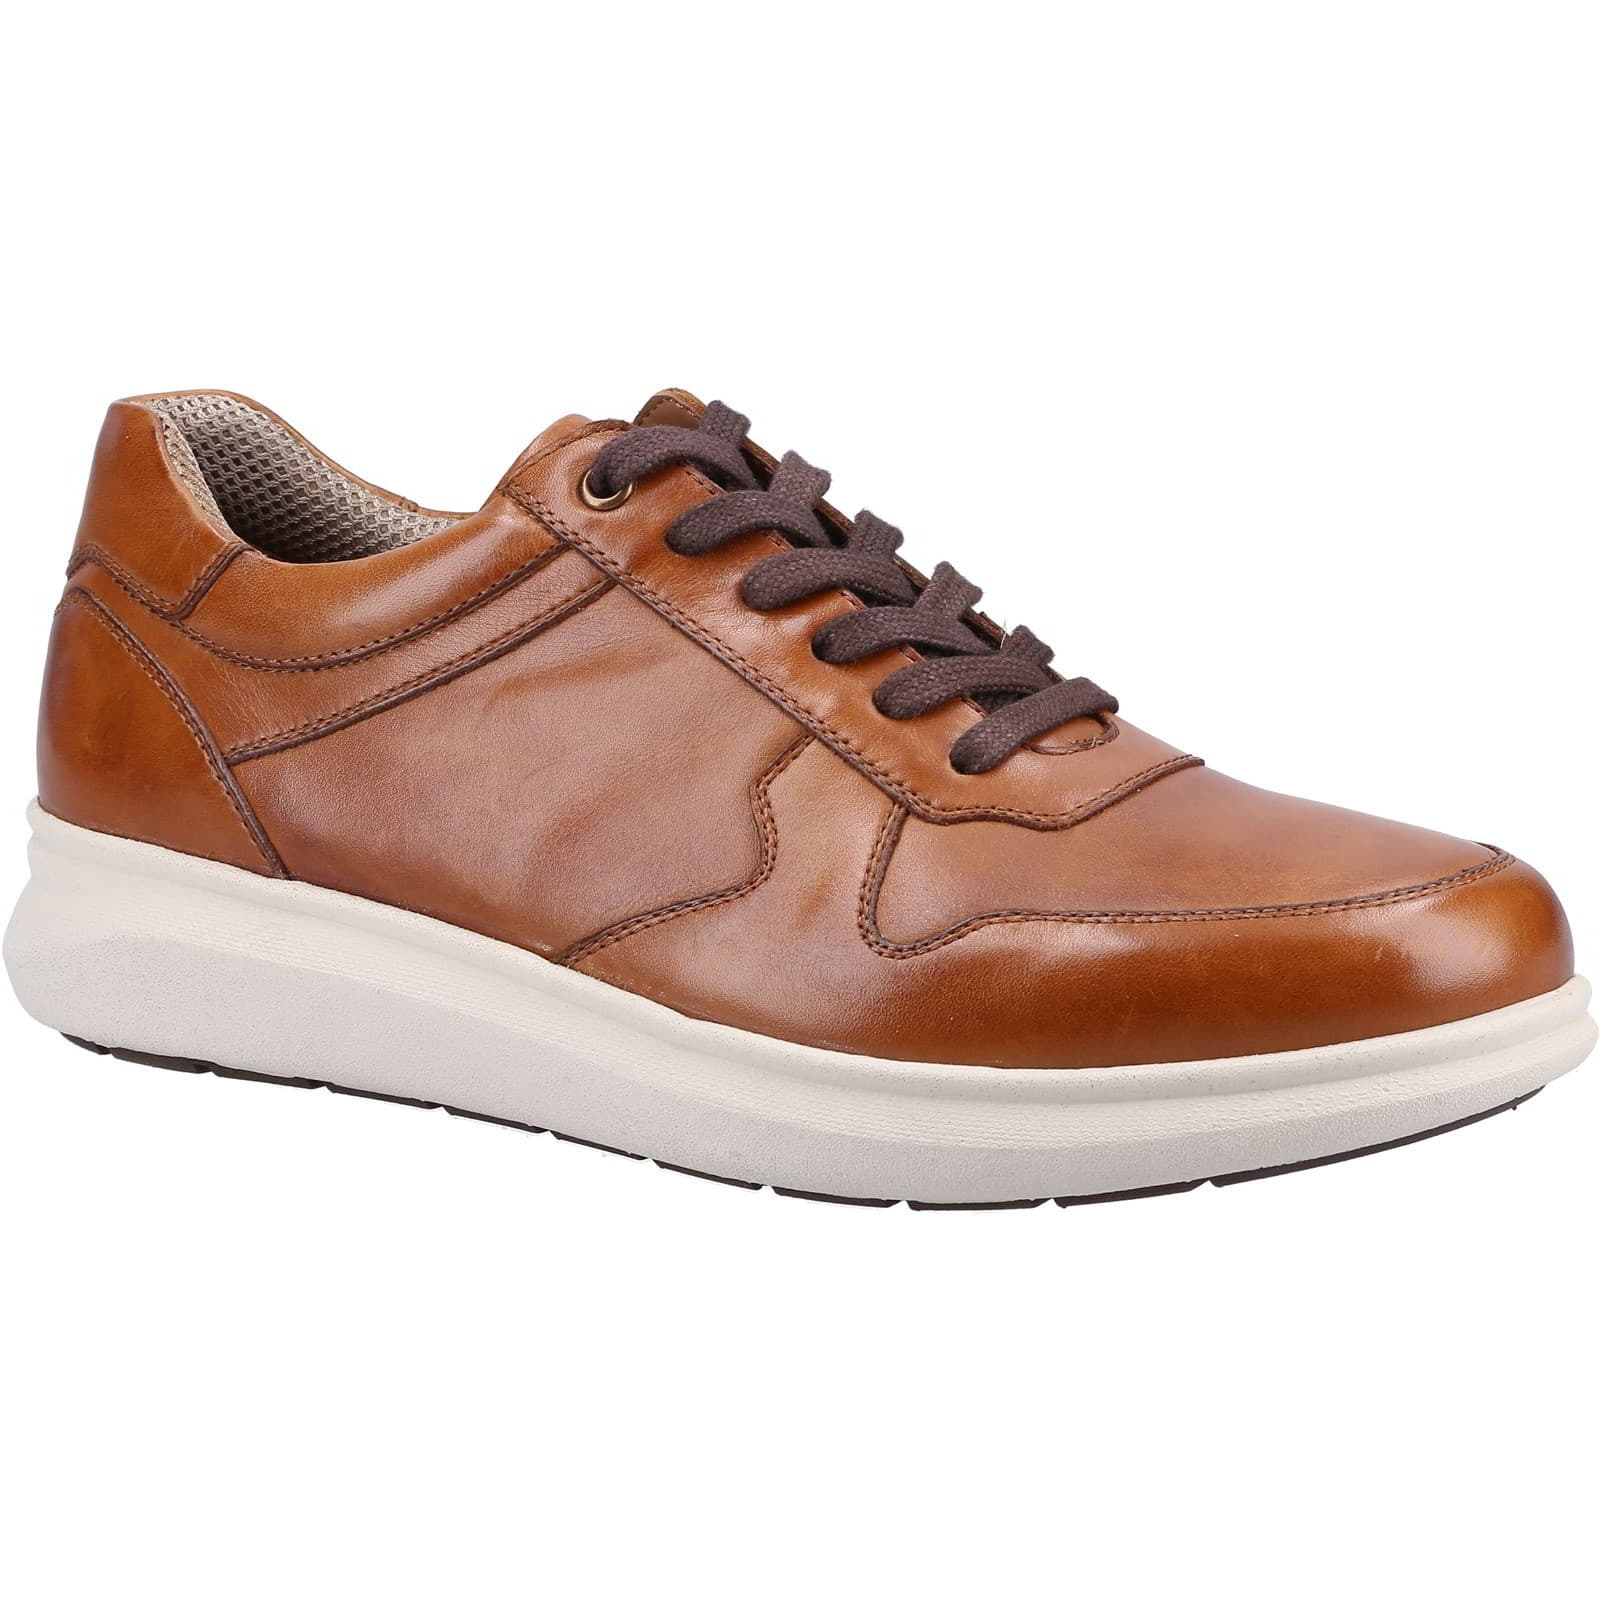 Hush Puppies Men's Braxton Lace Up Casual Trainers Shoes - UK 6